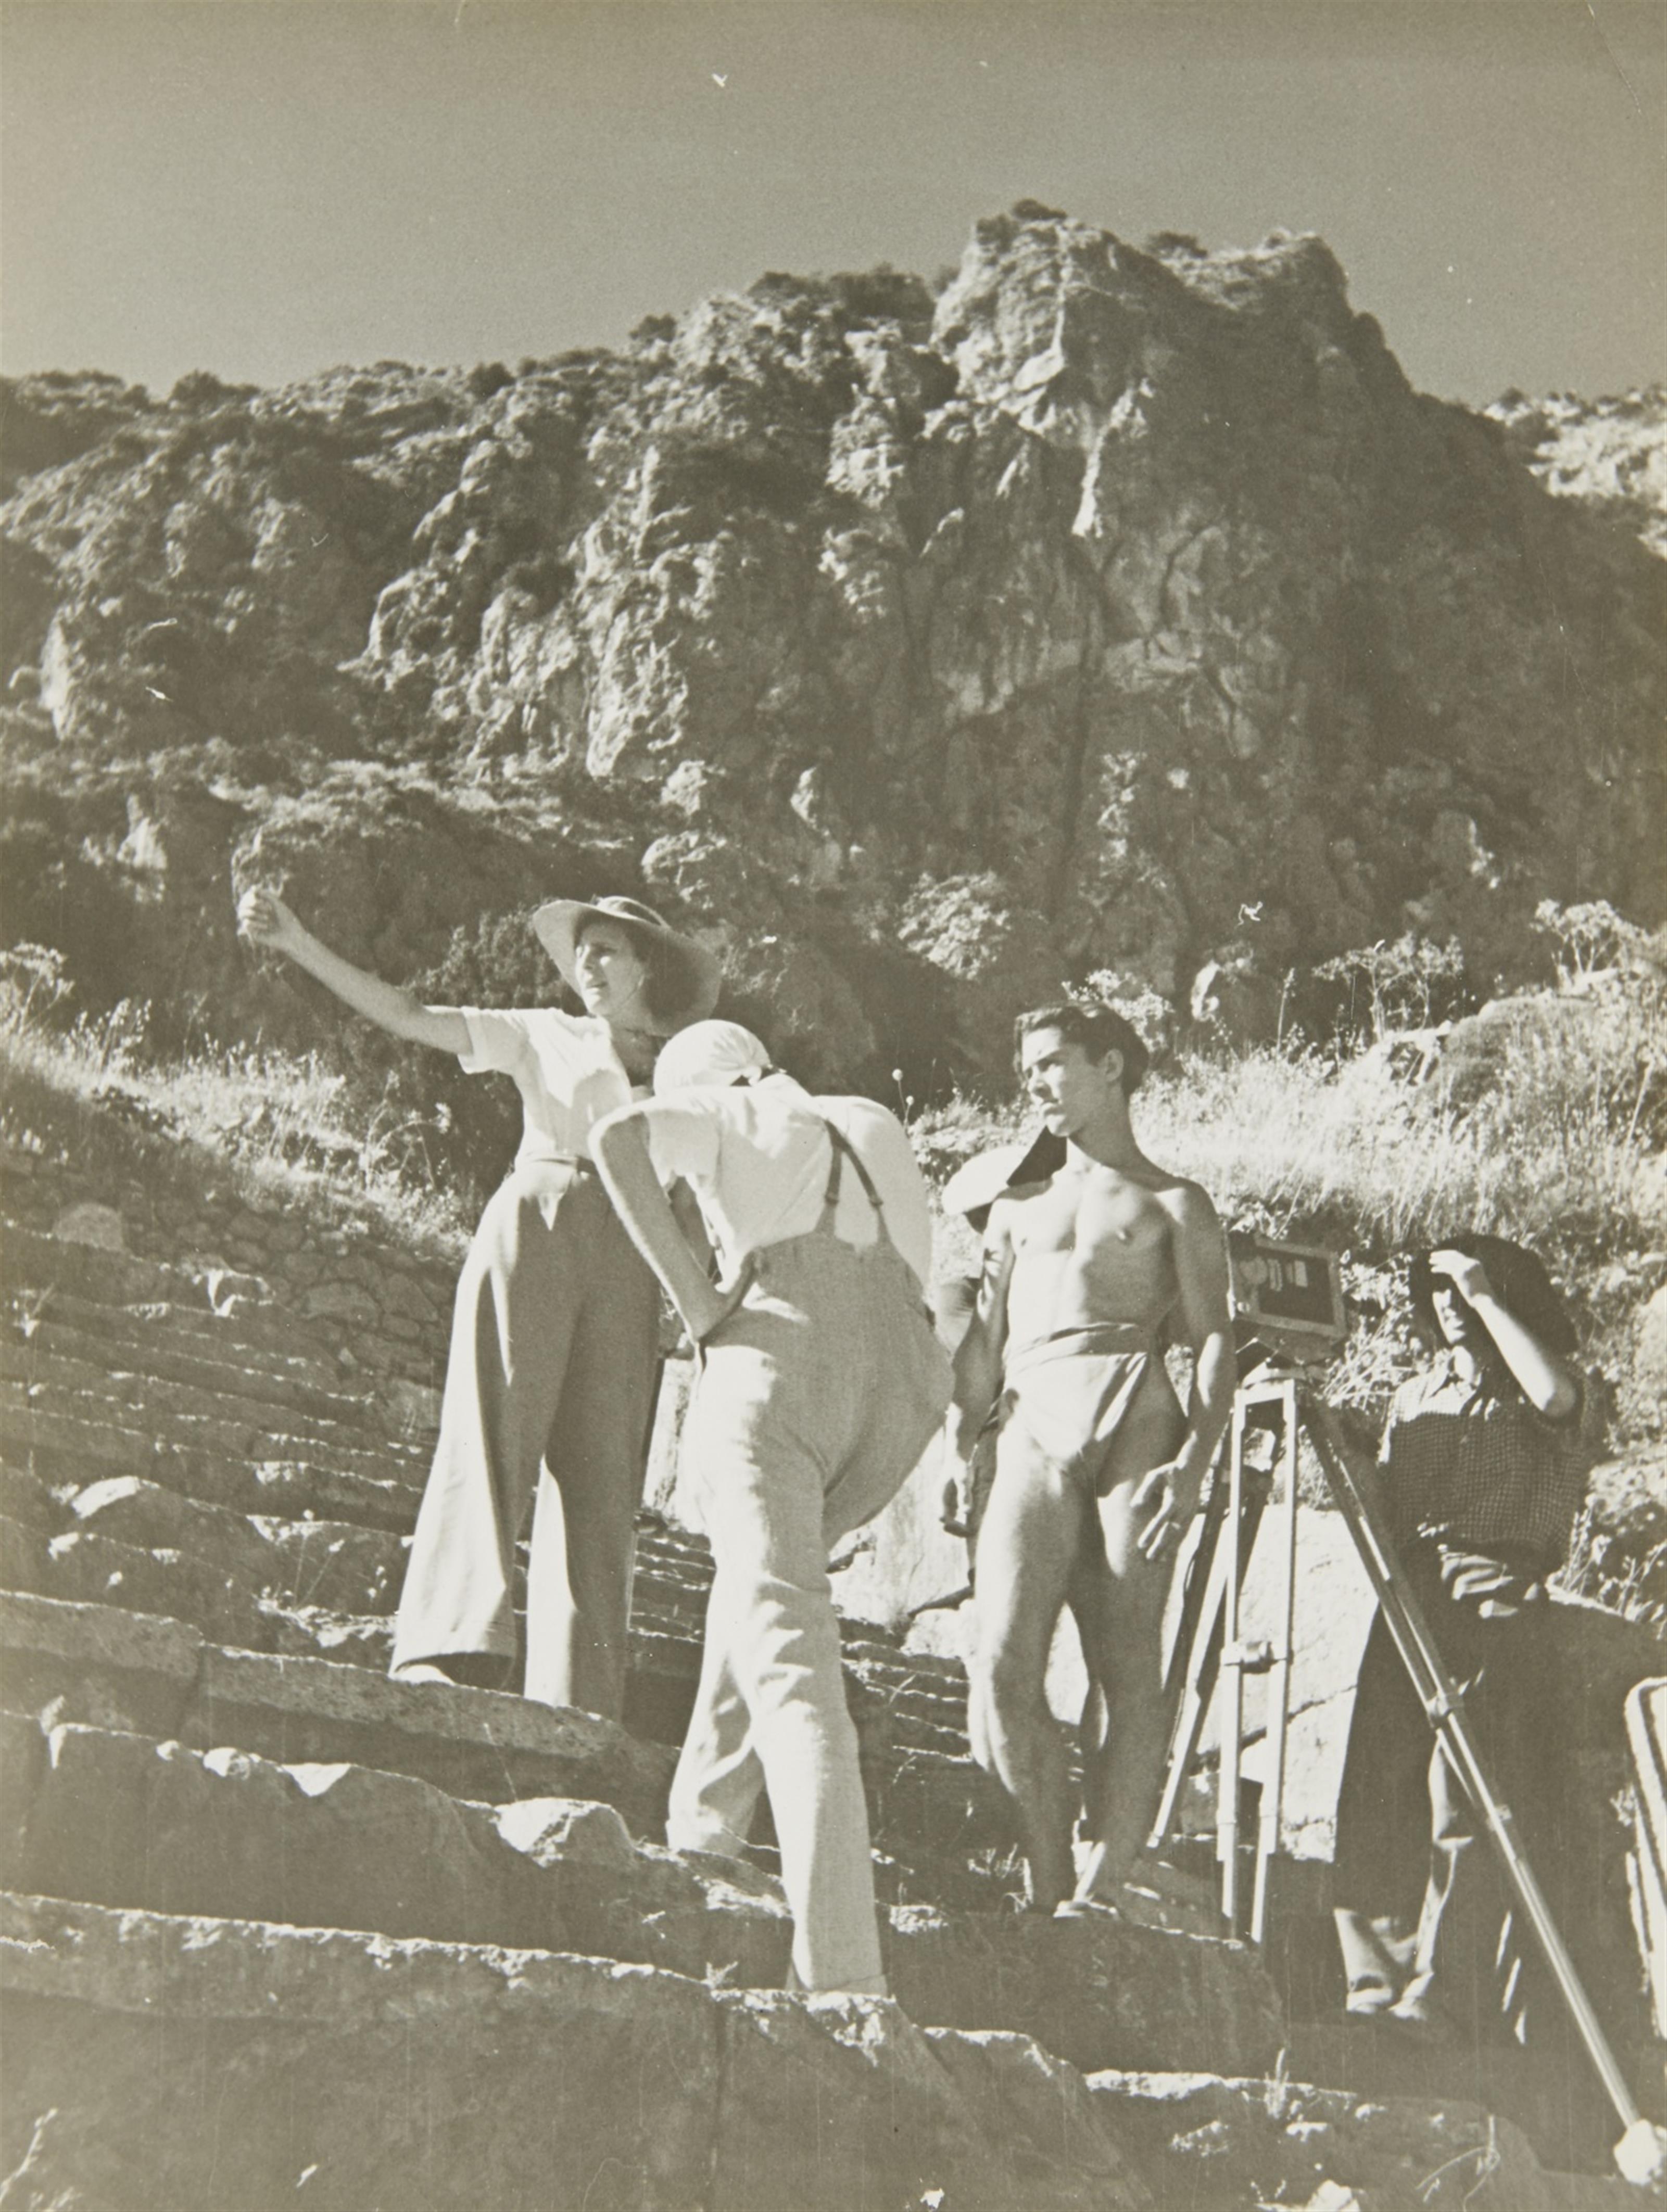 Diverse Photographen - Leni Riefenstahl beim Dreh des "Olympia"-Films (Leni Riefenstahl during the filming of "Olympia") - image-9